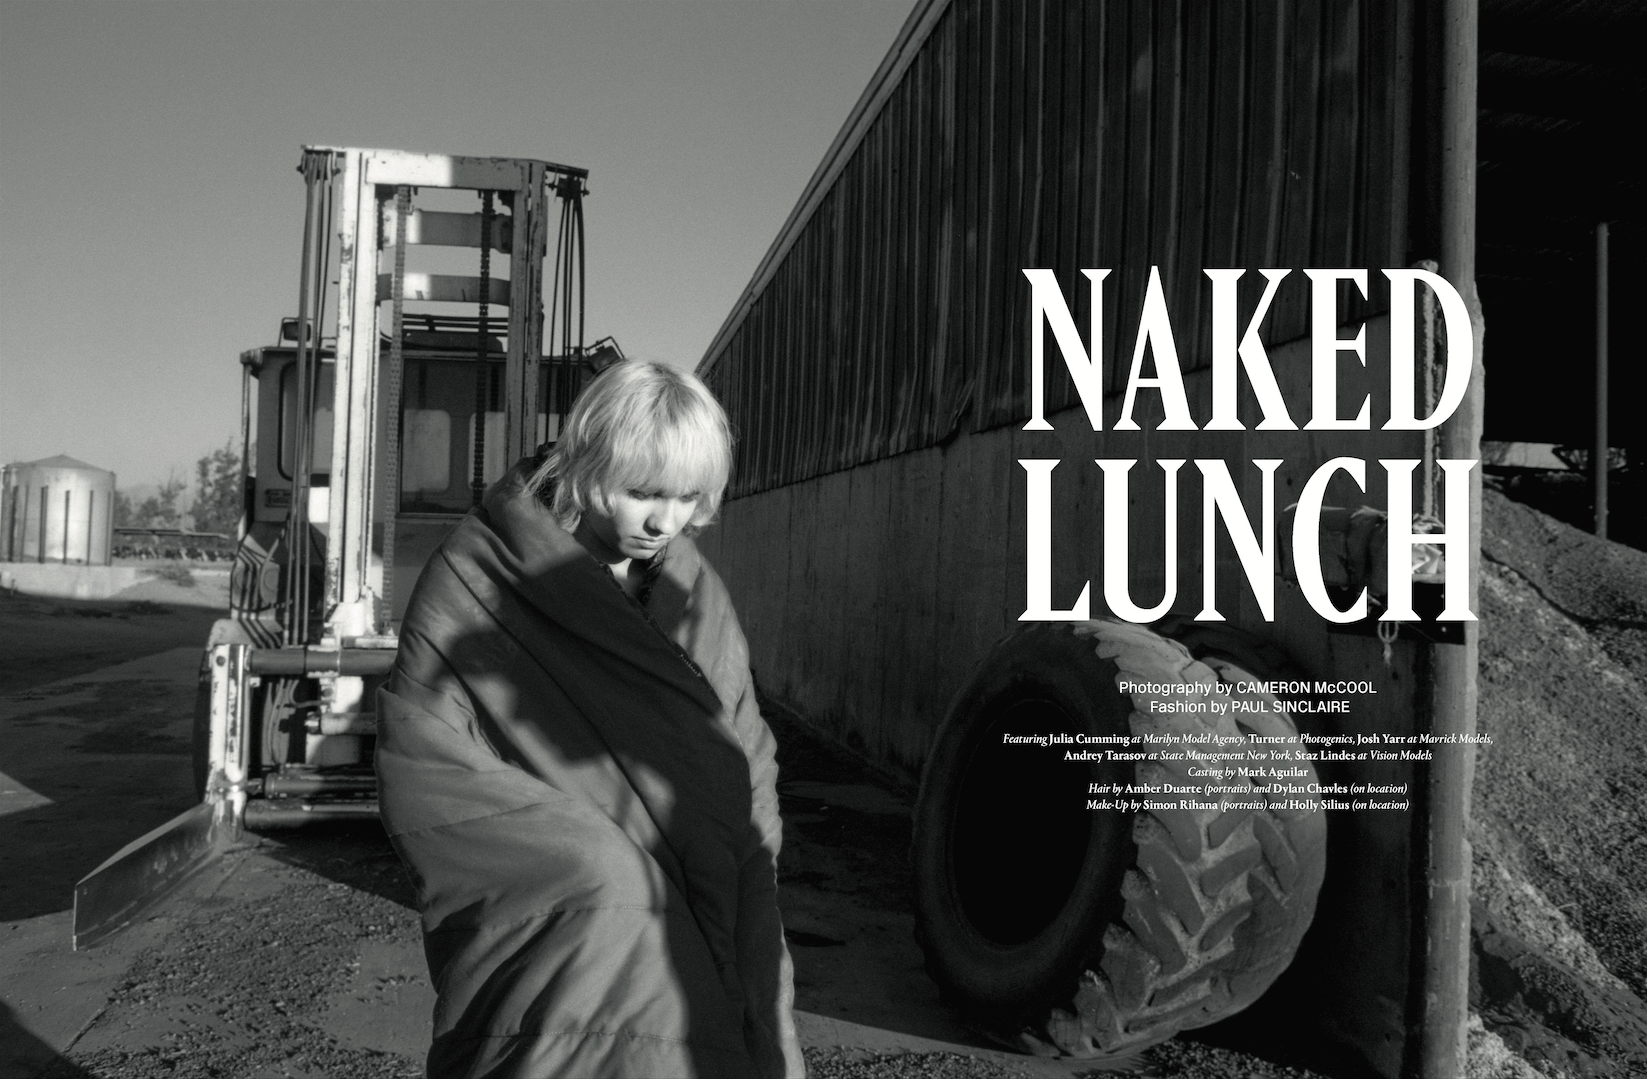 Paul Sinclaire | Behind the Blinds: Naked Lunch | 1